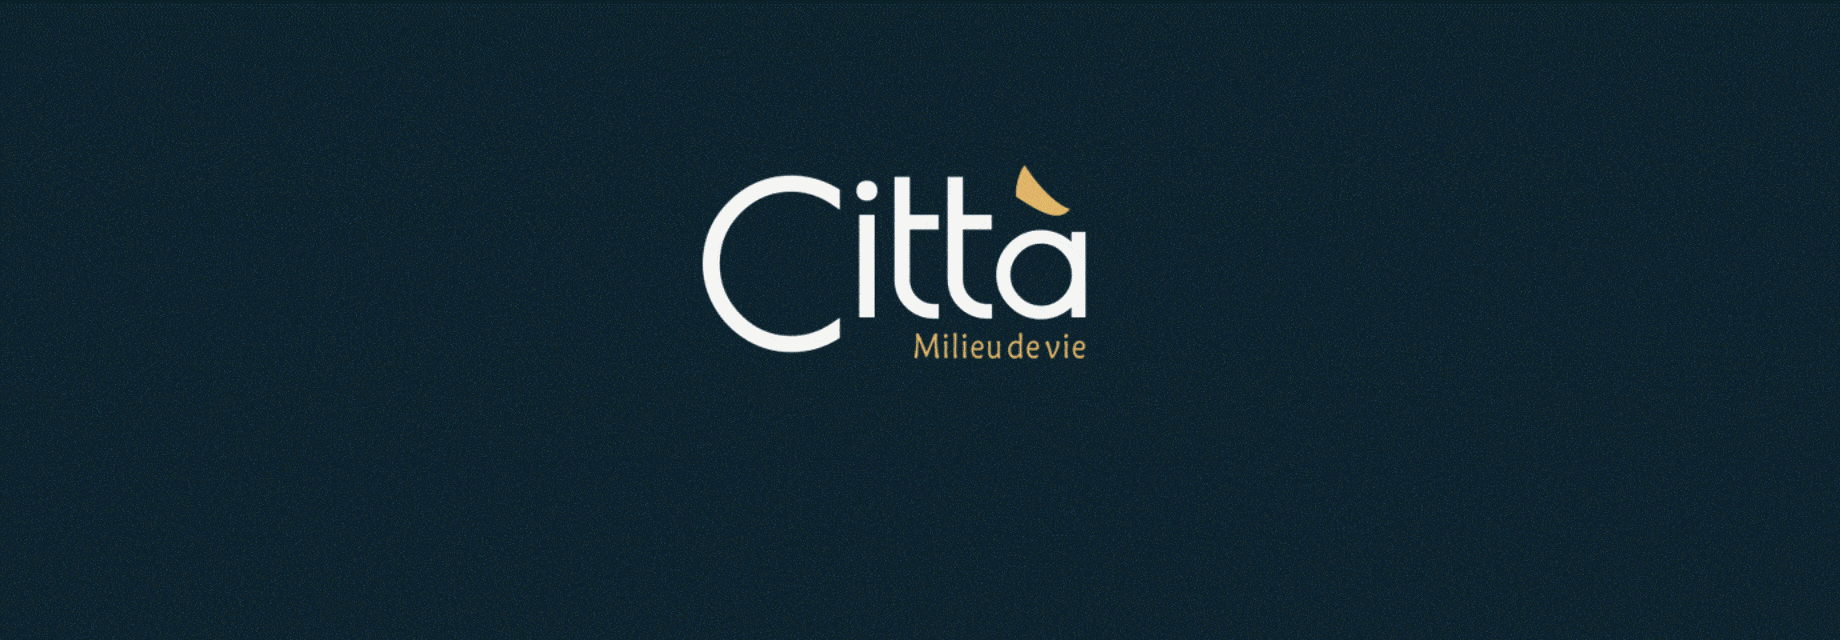 Città is a mixed-use project of five phases which include condominiums, apartments, cooperative housing and commercial spaces, all in a harmonious setting.